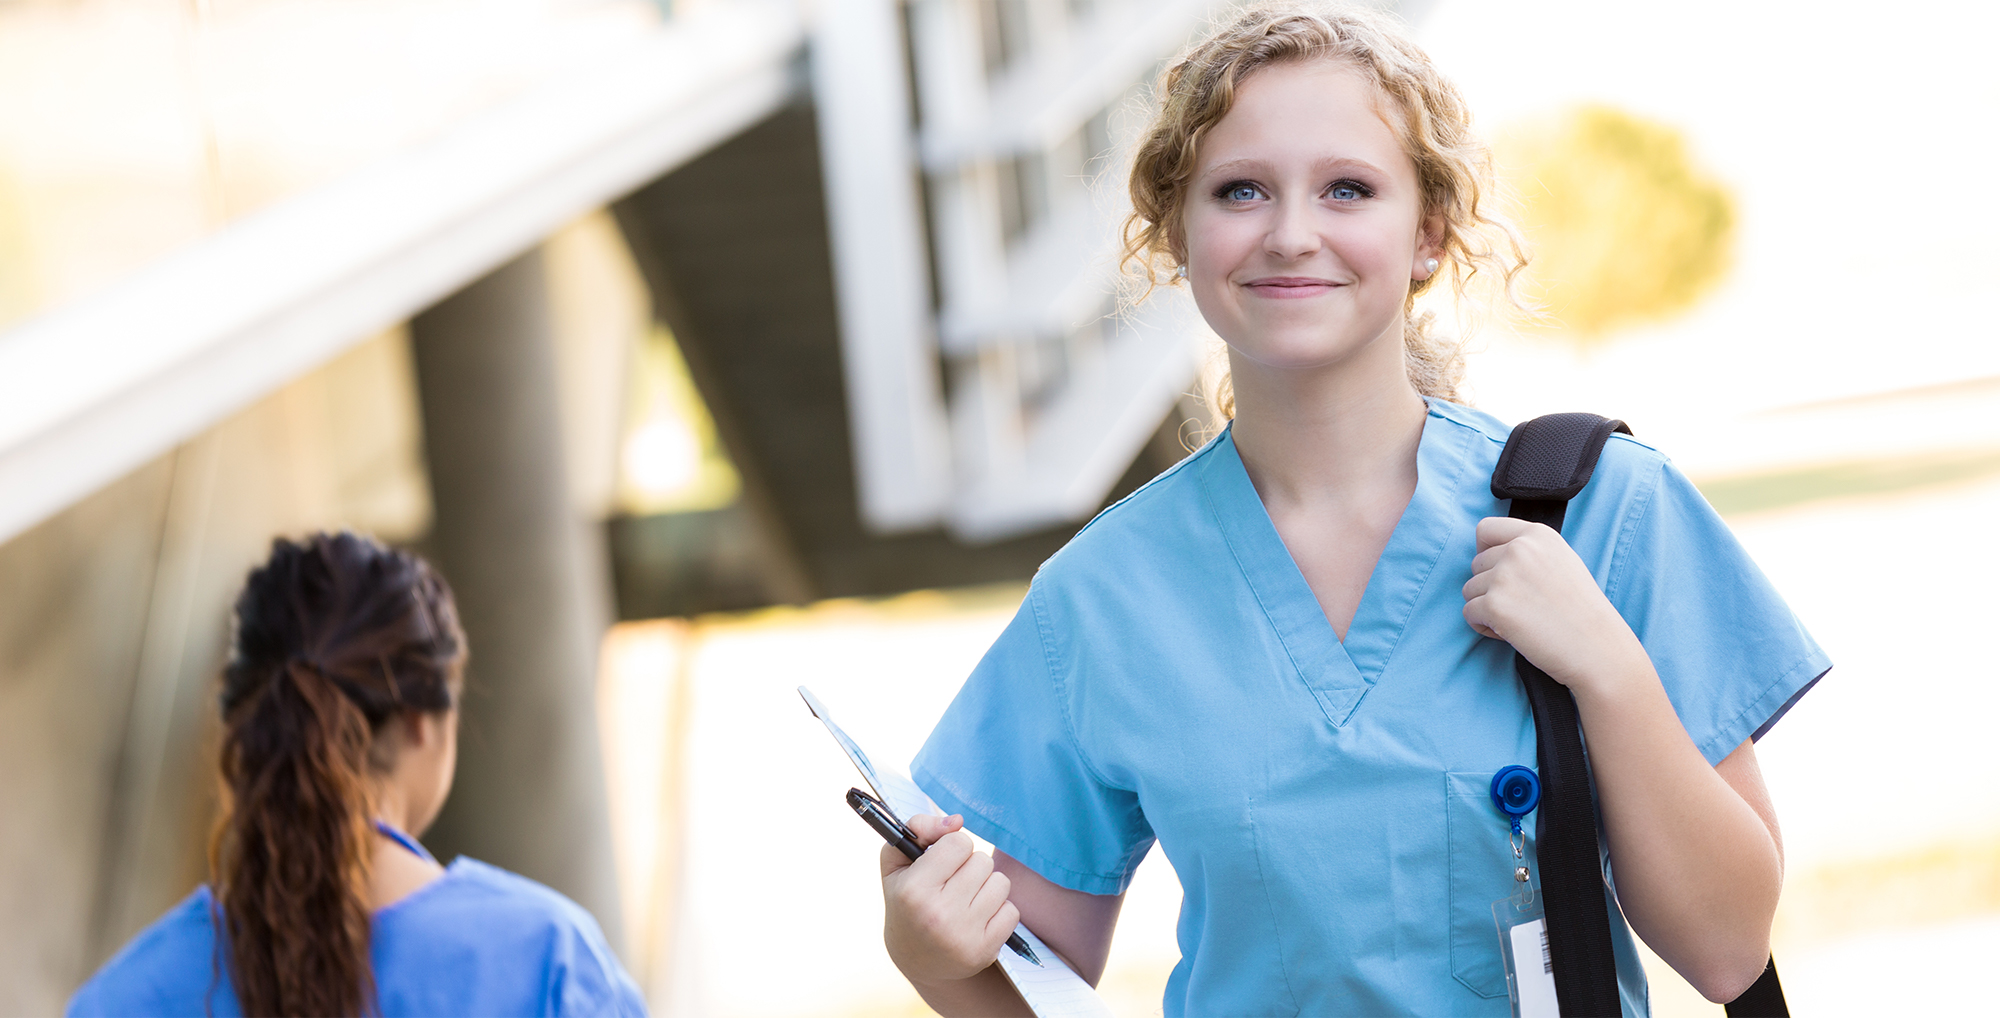 Master's Programs in Nursing Administration and Education